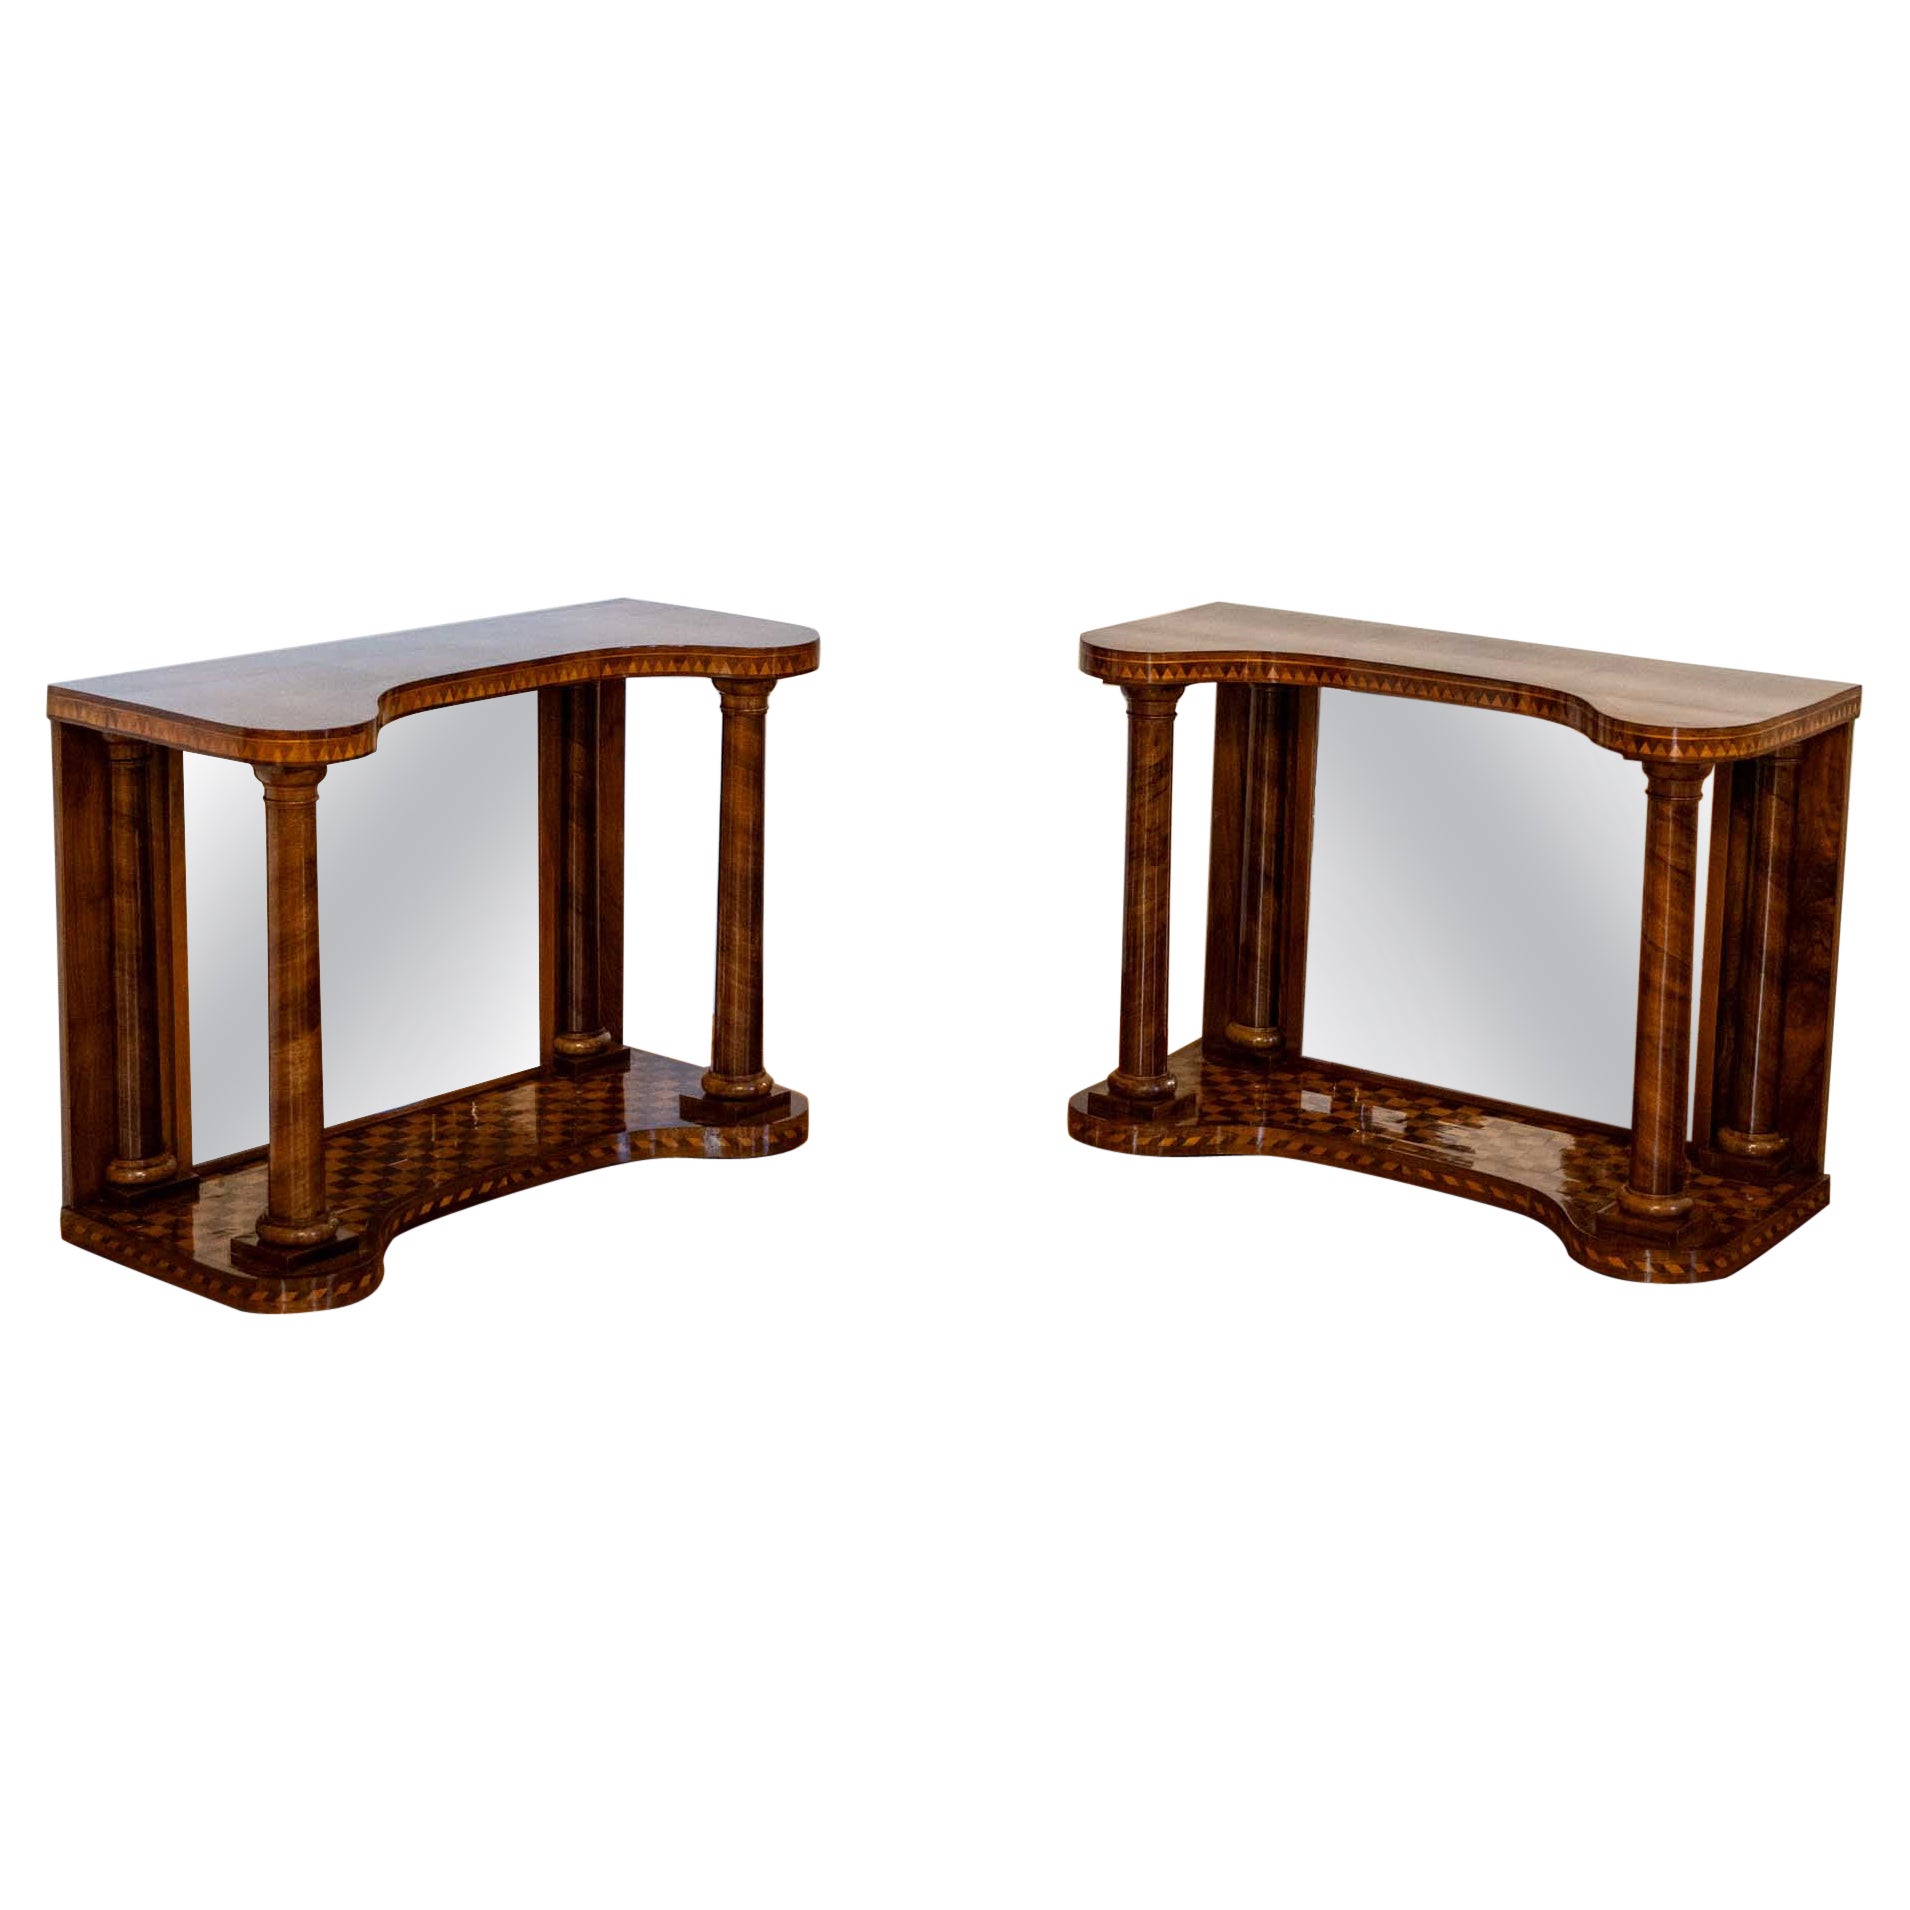 Pair of Parquetry Console Tables with Mirrors, Mid-19th Century For Sale